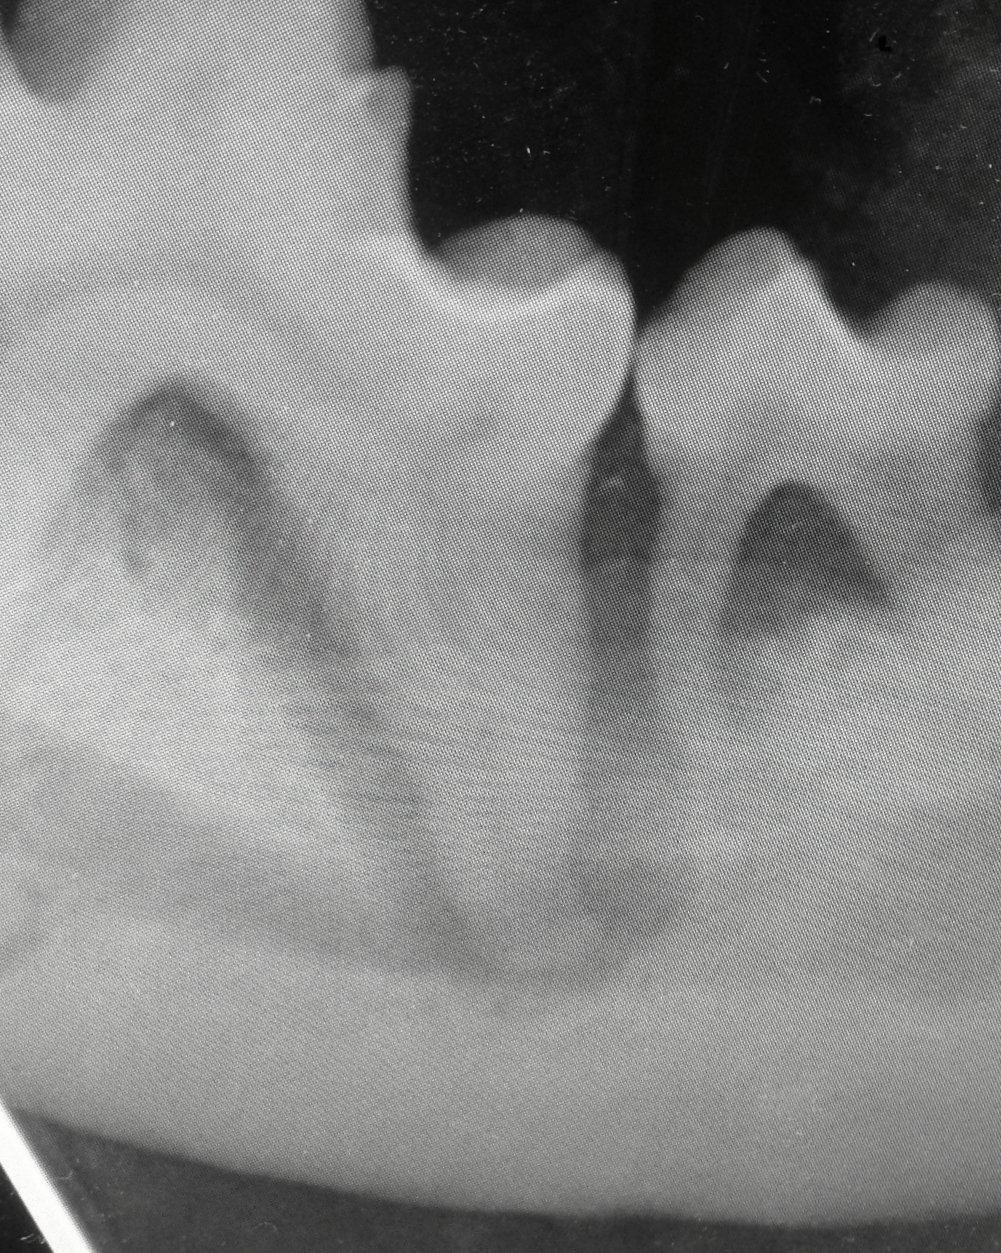 Xray showing bone loss around the rooth due to ongoing infection